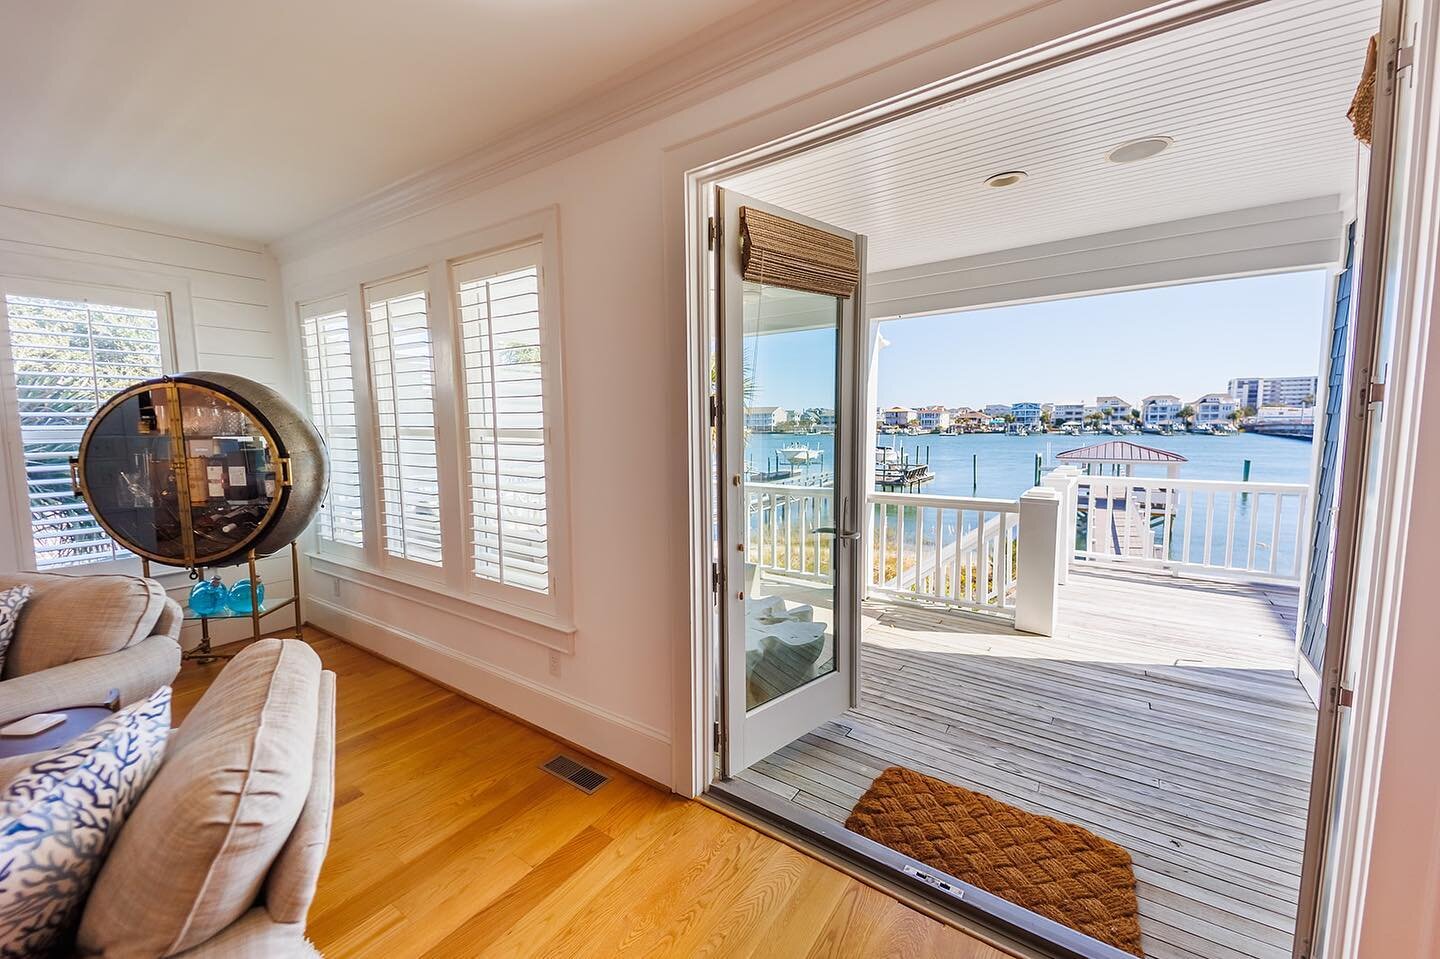 Let us open the doors for you - to this incredible place to call home. As we head into the weekend, can&rsquo;t you picture yourself here! Tonight you could ride your bike to dinner and tomorrow walk across the bridge to the beach! 

#realestate #rea